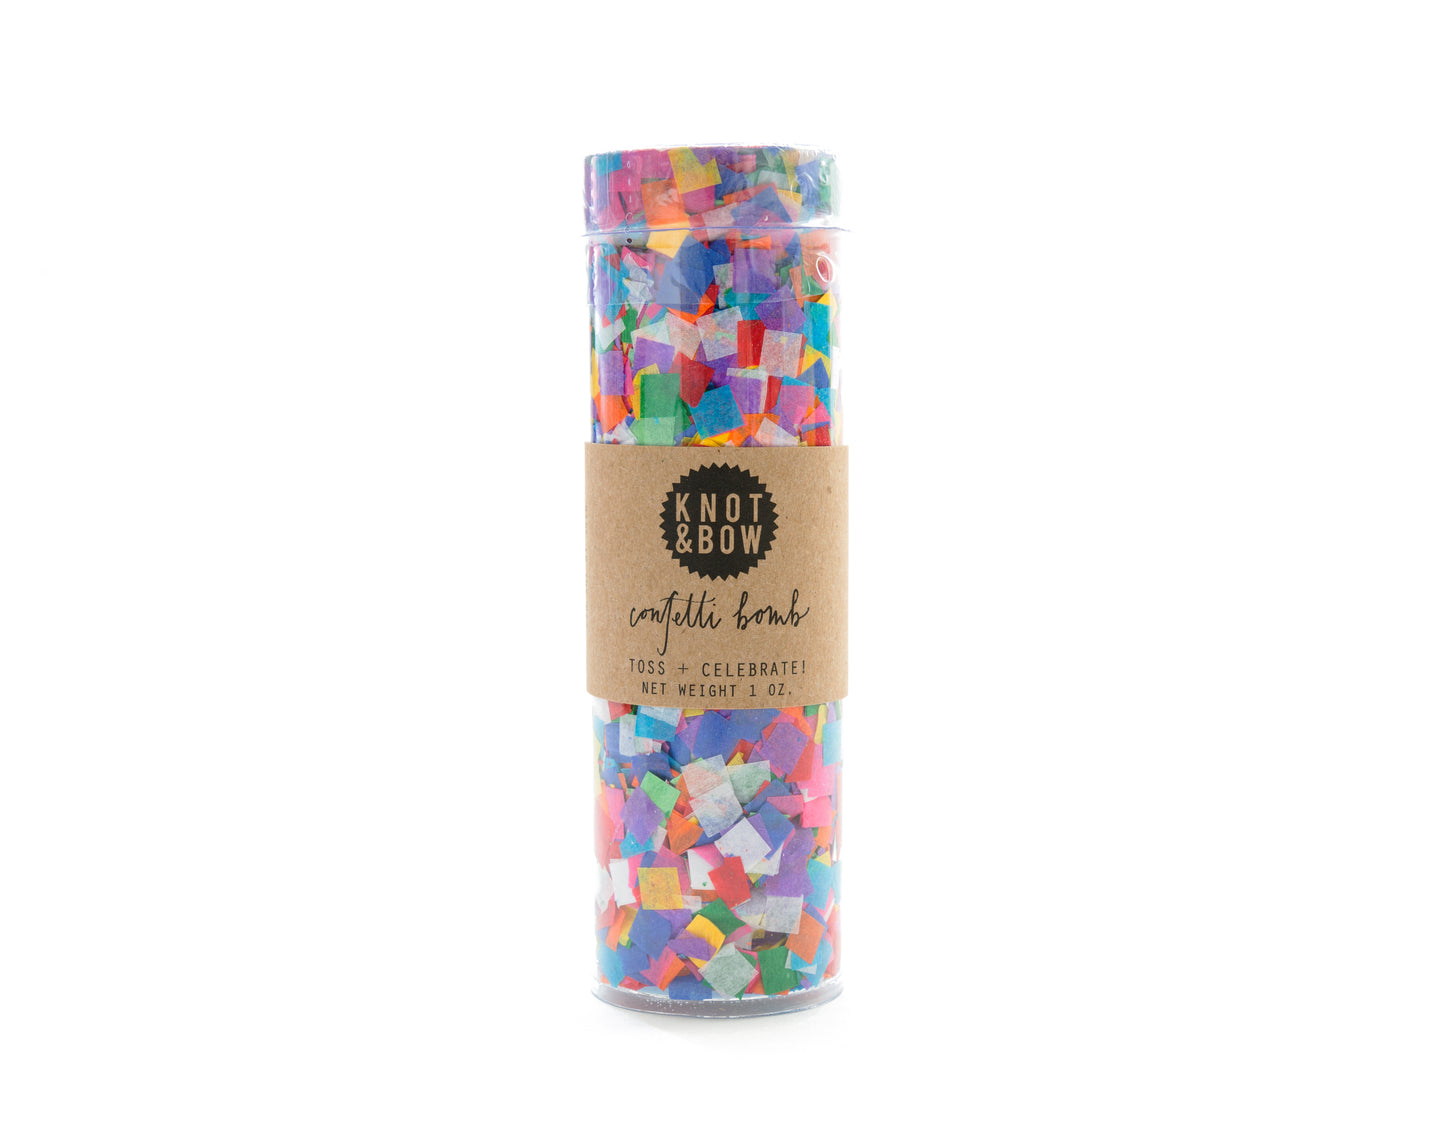 Confetti Bomb by Knot & Bow